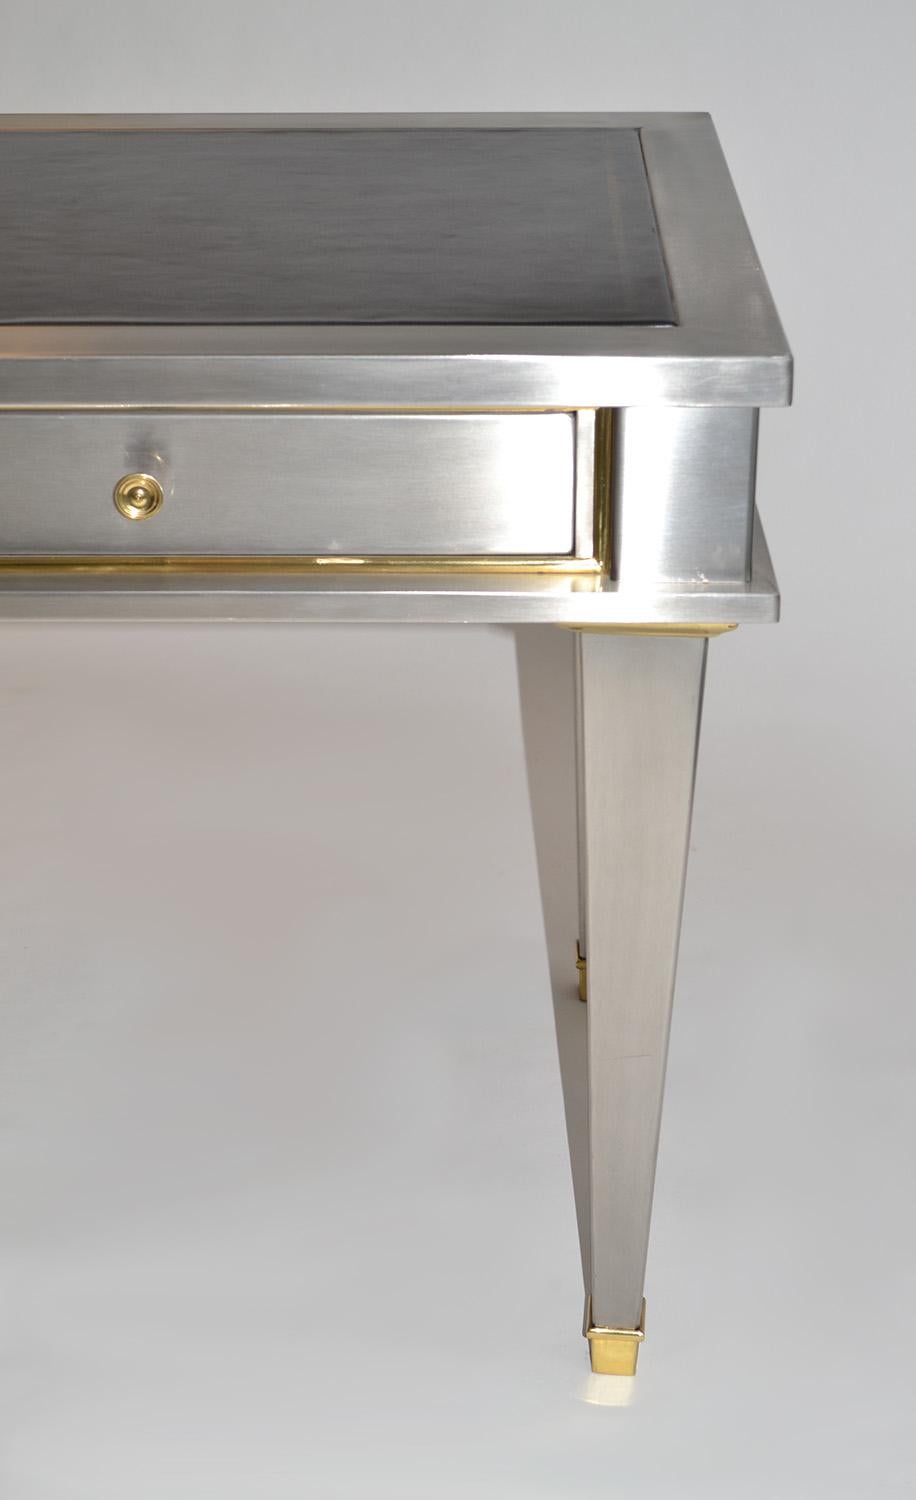 Stainless steel bronze neoclassical revival desk 20th century (mid-) after John Vesey. A diminutive steel writing table, desk or bureau plat after a design by John Vesey. Clad in brushed steel with gilt bronze accents and handles, the desk features